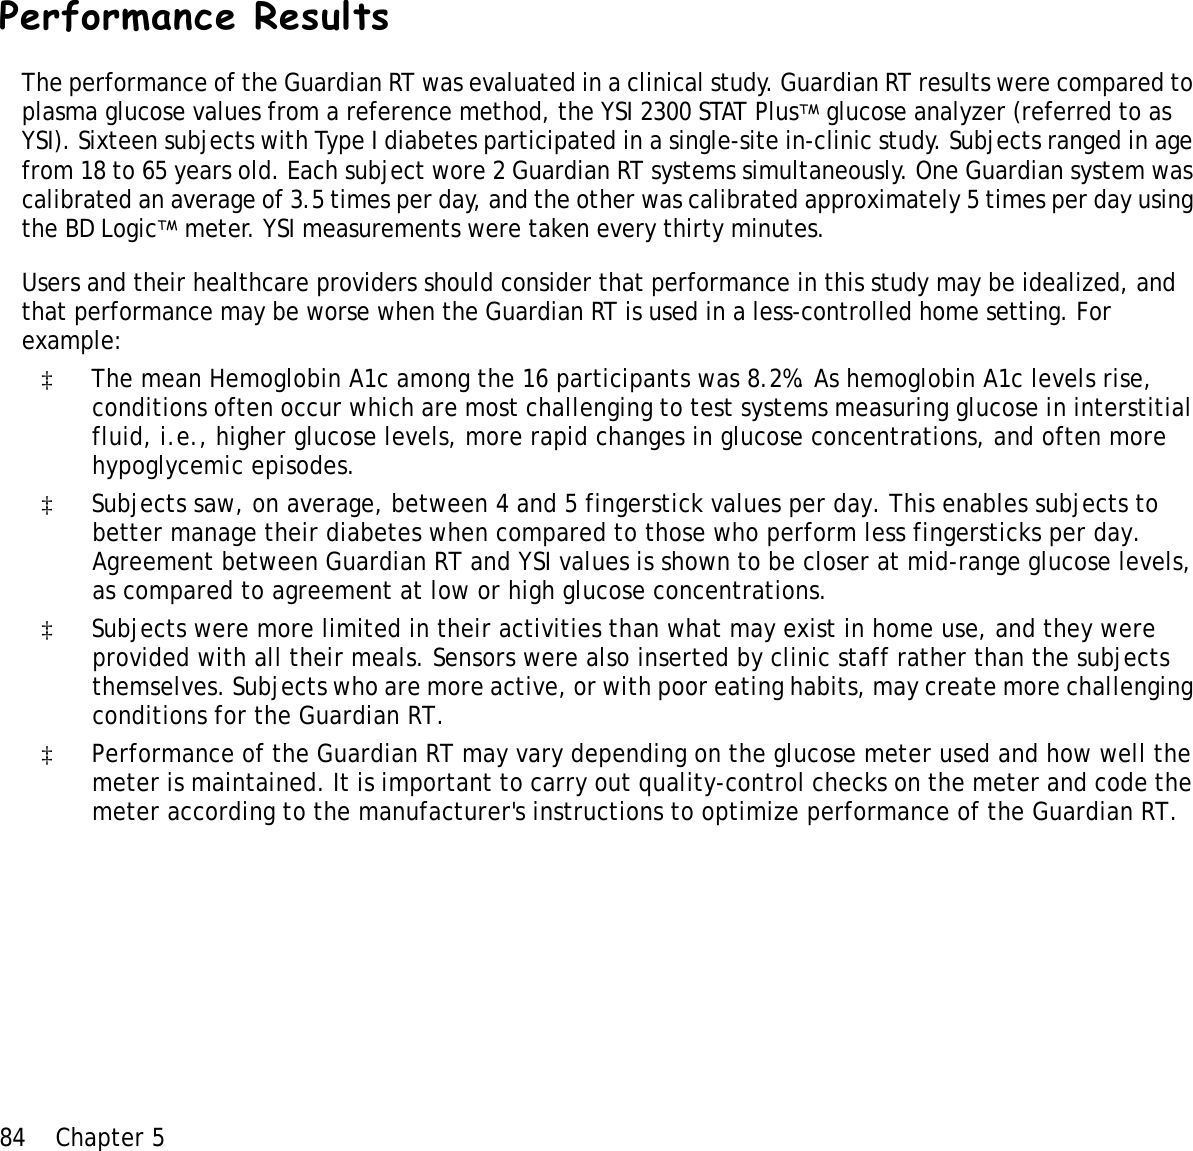 84 Chapter 5 Performance ResultsThe performance of the Guardian RT was evaluated in a clinical study. Guardian RT results were compared to plasma glucose values from a reference method, the YSI 2300 STAT PlusTM glucose analyzer (referred to as YSI). Sixteen subjects with Type I diabetes participated in a single-site in-clinic study. Subjects ranged in age from 18 to 65 years old. Each subject wore 2 Guardian RT systems simultaneously. One Guardian system was calibrated an average of 3.5 times per day, and the other was calibrated approximately 5 times per day using the BD LogicTM meter. YSI measurements were taken every thirty minutes.Users and their healthcare providers should consider that performance in this study may be idealized, and that performance may be worse when the Guardian RT is used in a less-controlled home setting. For example:‡The mean Hemoglobin A1c among the 16 participants was 8.2%. As hemoglobin A1c levels rise, conditions often occur which are most challenging to test systems measuring glucose in interstitial fluid, i.e., higher glucose levels, more rapid changes in glucose concentrations, and often more hypoglycemic episodes. ‡Subjects saw, on average, between 4 and 5 fingerstick values per day. This enables subjects to better manage their diabetes when compared to those who perform less fingersticks per day.  Agreement between Guardian RT and YSI values is shown to be closer at mid-range glucose levels, as compared to agreement at low or high glucose concentrations. ‡Subjects were more limited in their activities than what may exist in home use, and they were provided with all their meals. Sensors were also inserted by clinic staff rather than the subjects themselves. Subjects who are more active, or with poor eating habits, may create more challenging conditions for the Guardian RT.‡Performance of the Guardian RT may vary depending on the glucose meter used and how well the meter is maintained. It is important to carry out quality-control checks on the meter and code the meter according to the manufacturer&apos;s instructions to optimize performance of the Guardian RT.